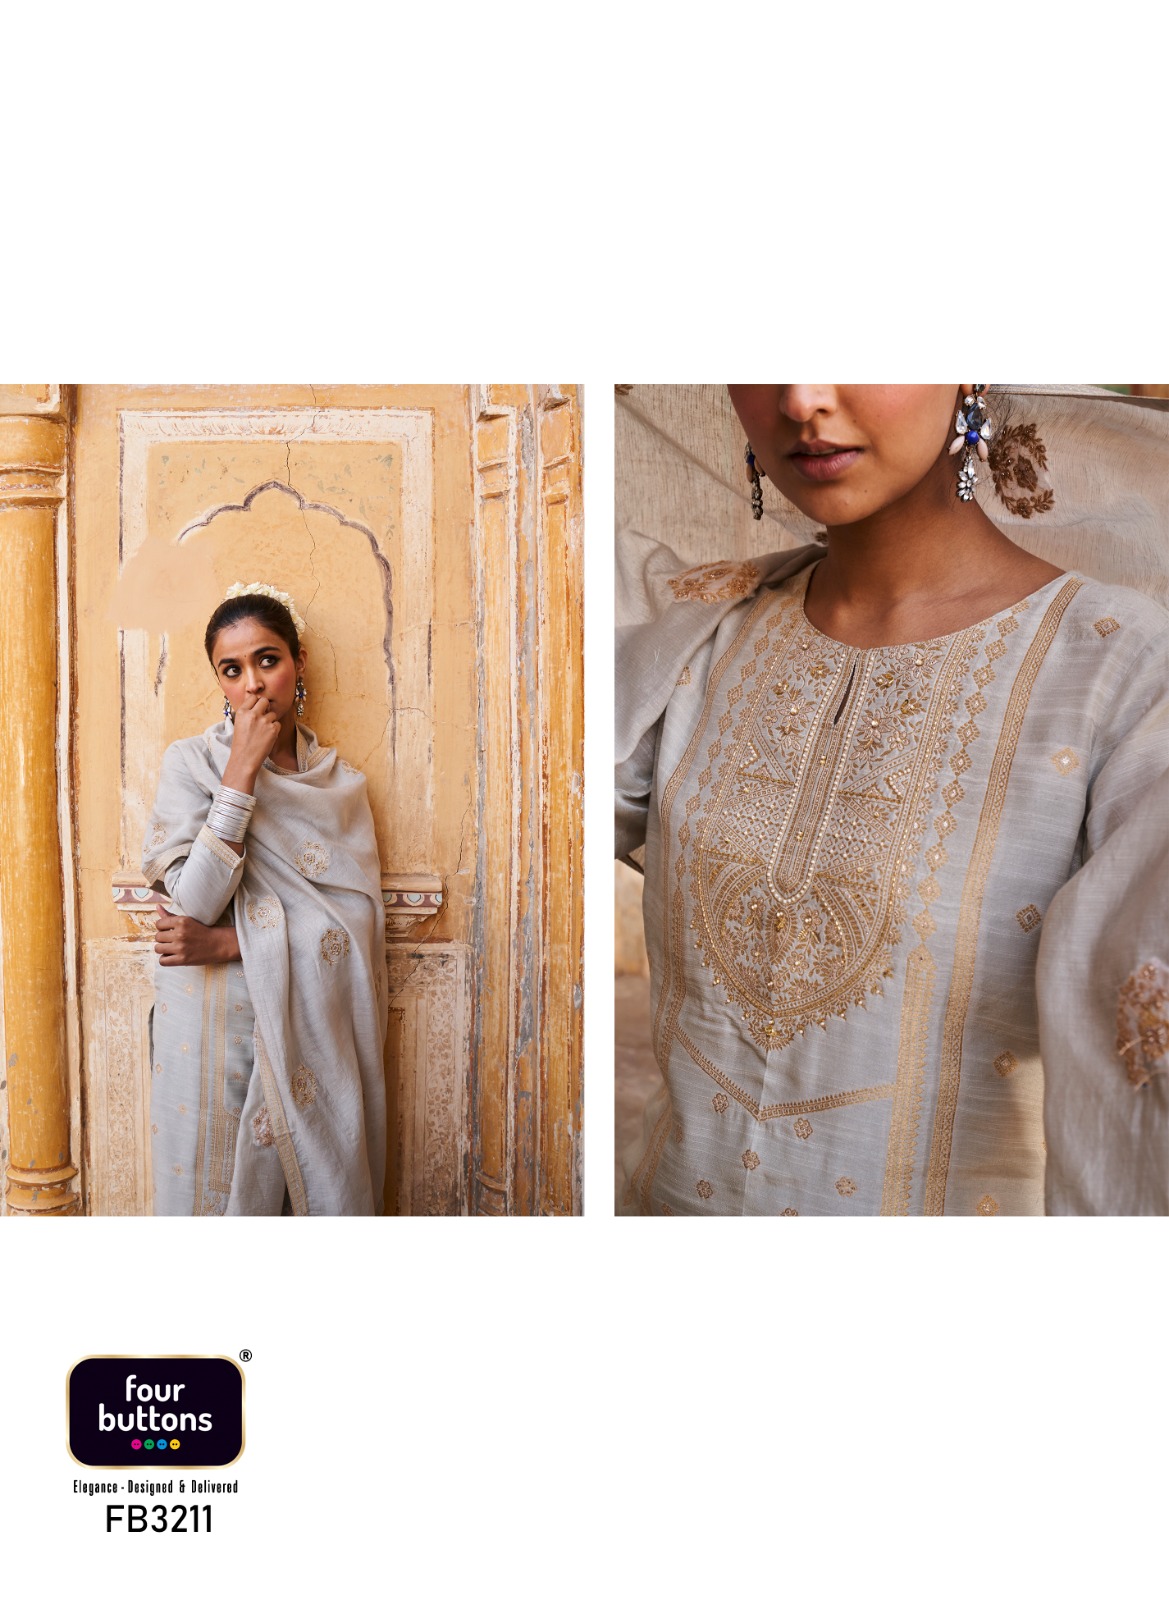 four buttons aarzoo linen attrective look top bottom with dupatta catalog